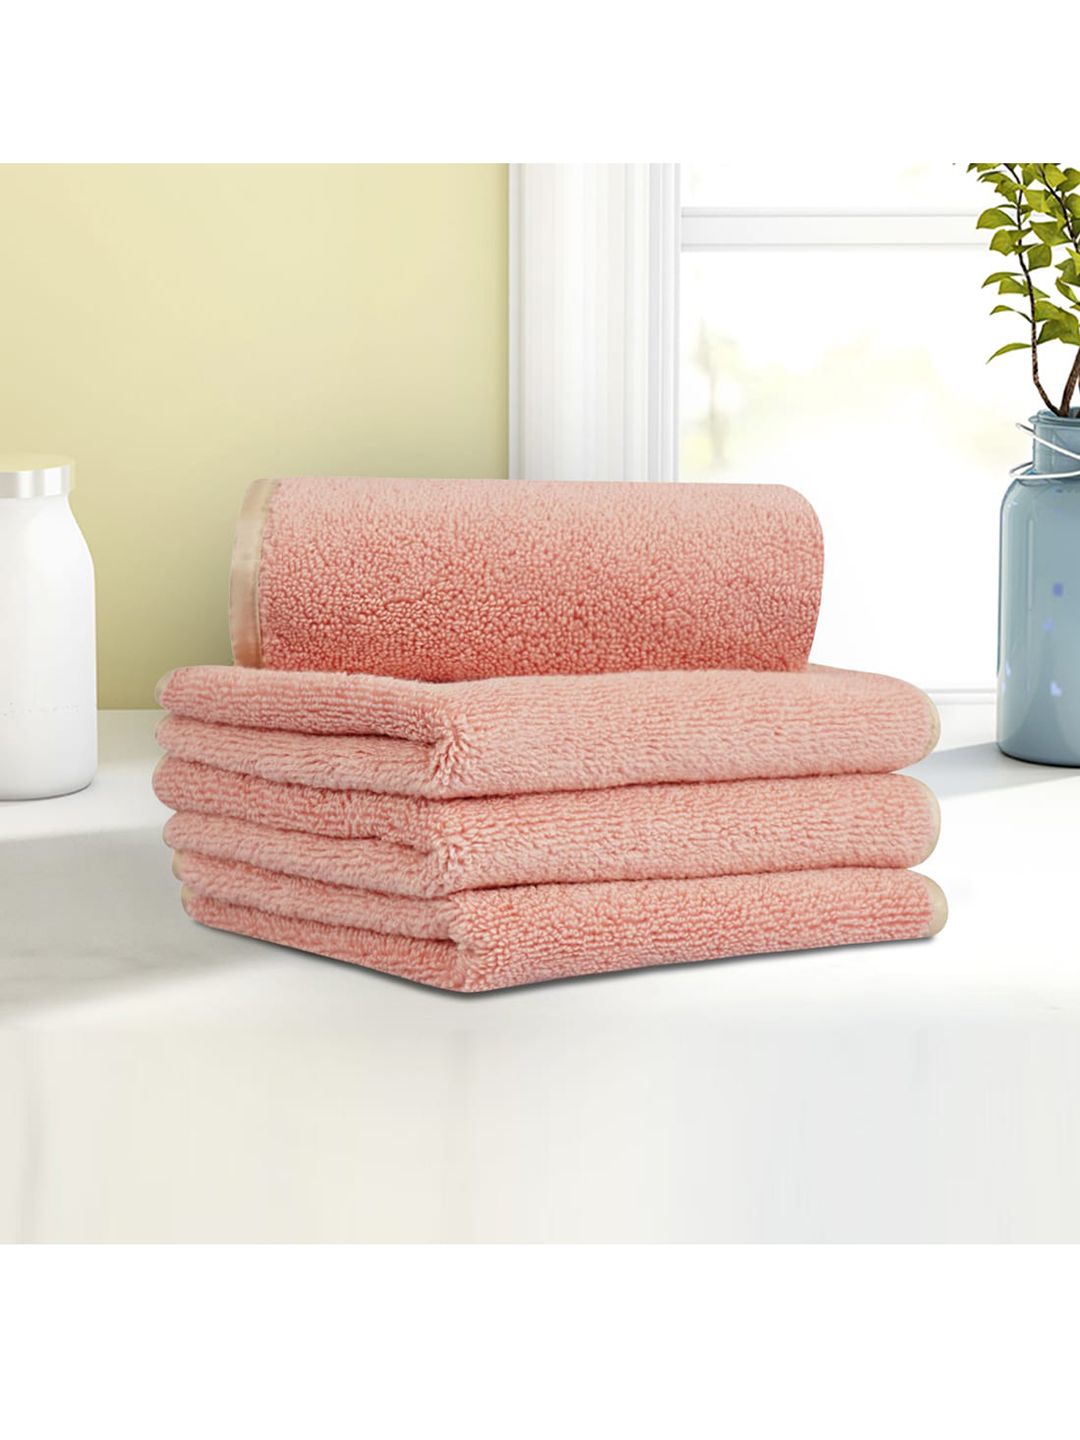 LUSH & BEYOND Set Of 4 Peach-Coloured Solid 500 GSM Pure Cotton Face Towels Price in India